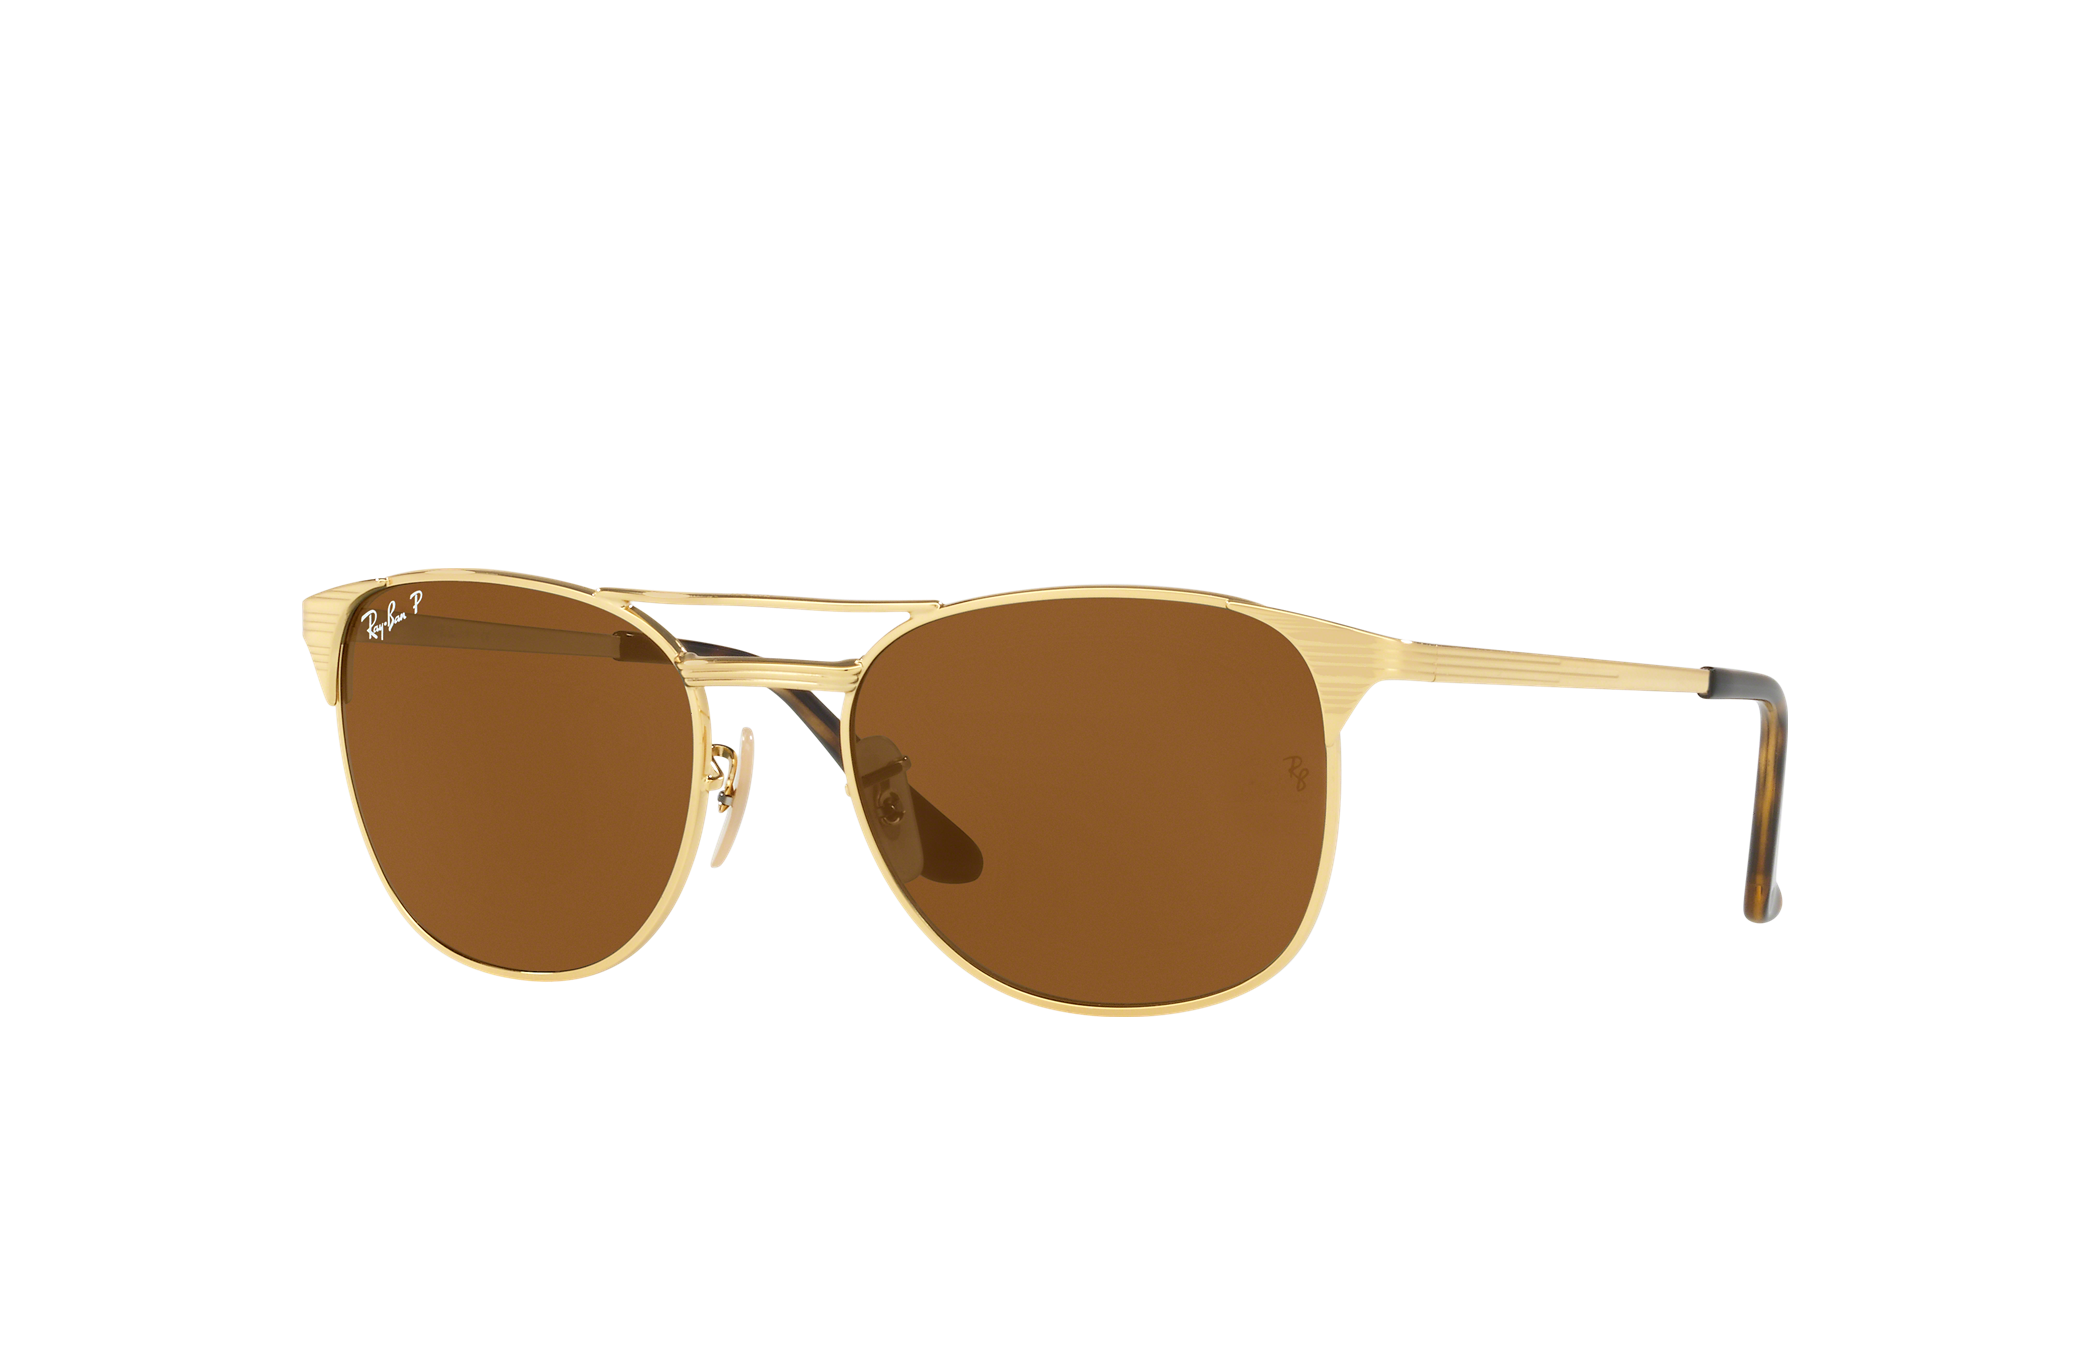 Signet Sunglasses in Gold and Brown | Ray-Ban®